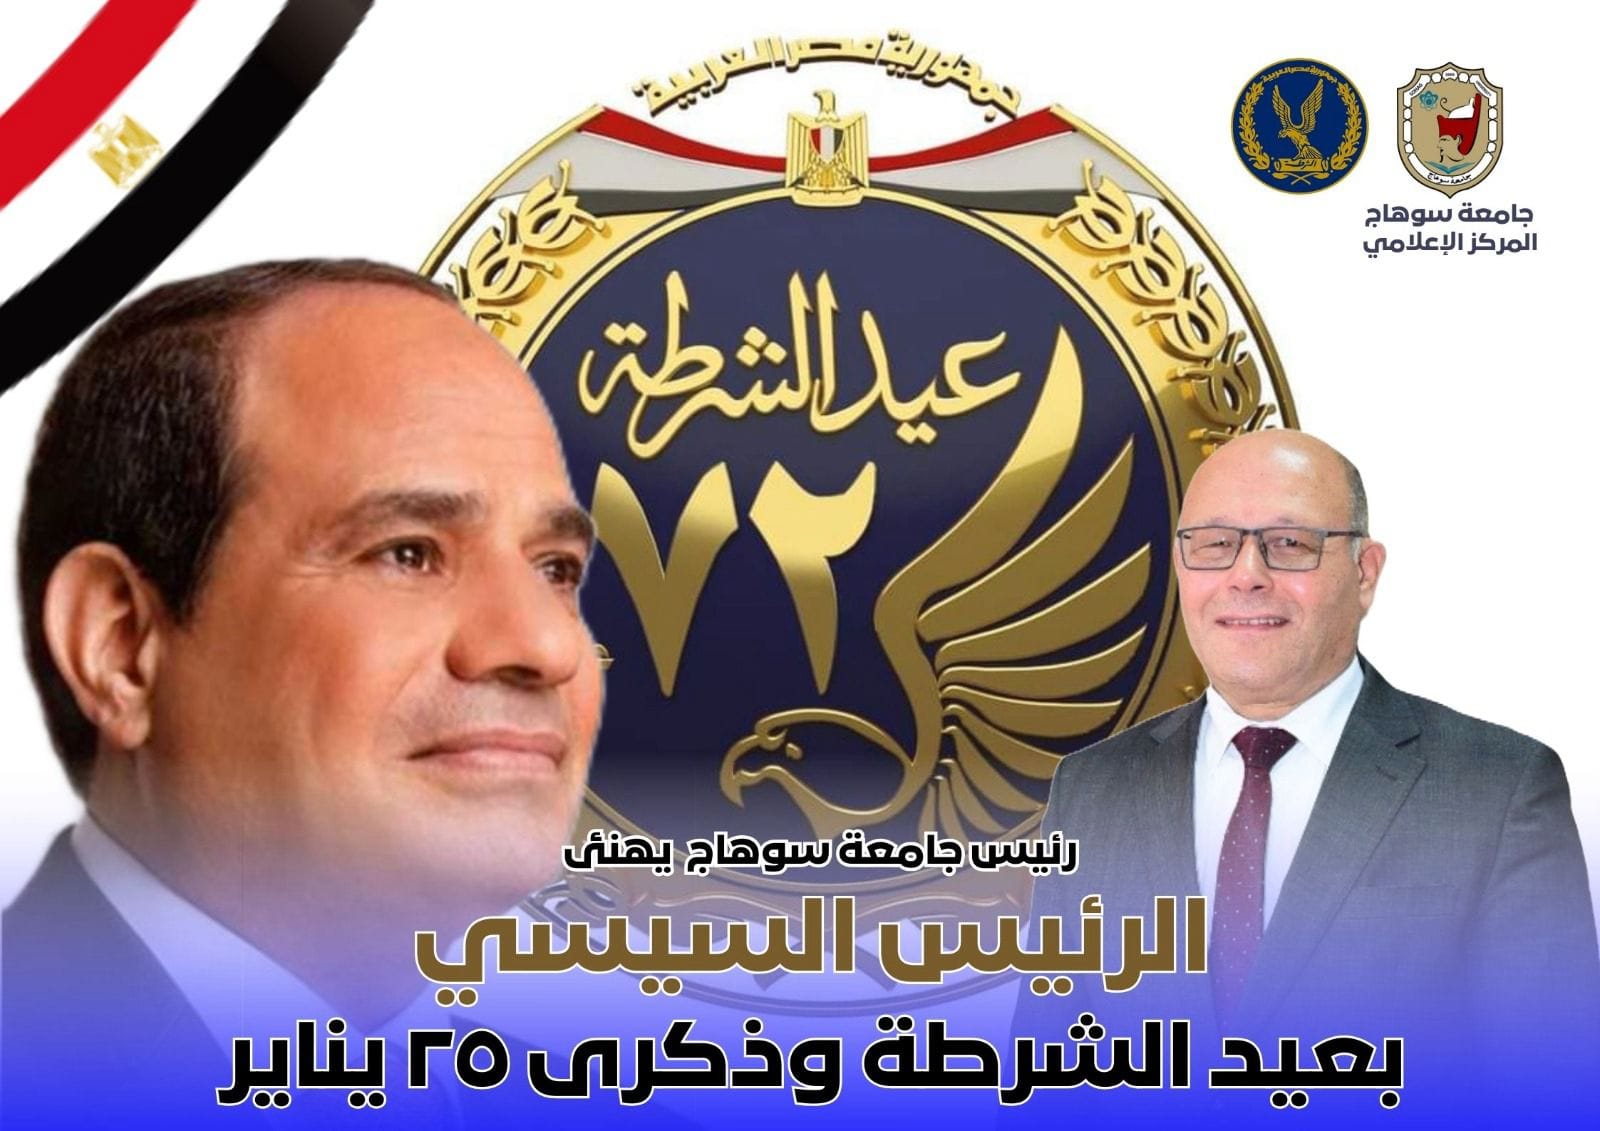 Sohag University President congratulates President Sisi on Police Day and the anniversary of January 25, and stresses that this anniversary is a great opportunity to remember and remind our youth of the lives of our brave martyrs.